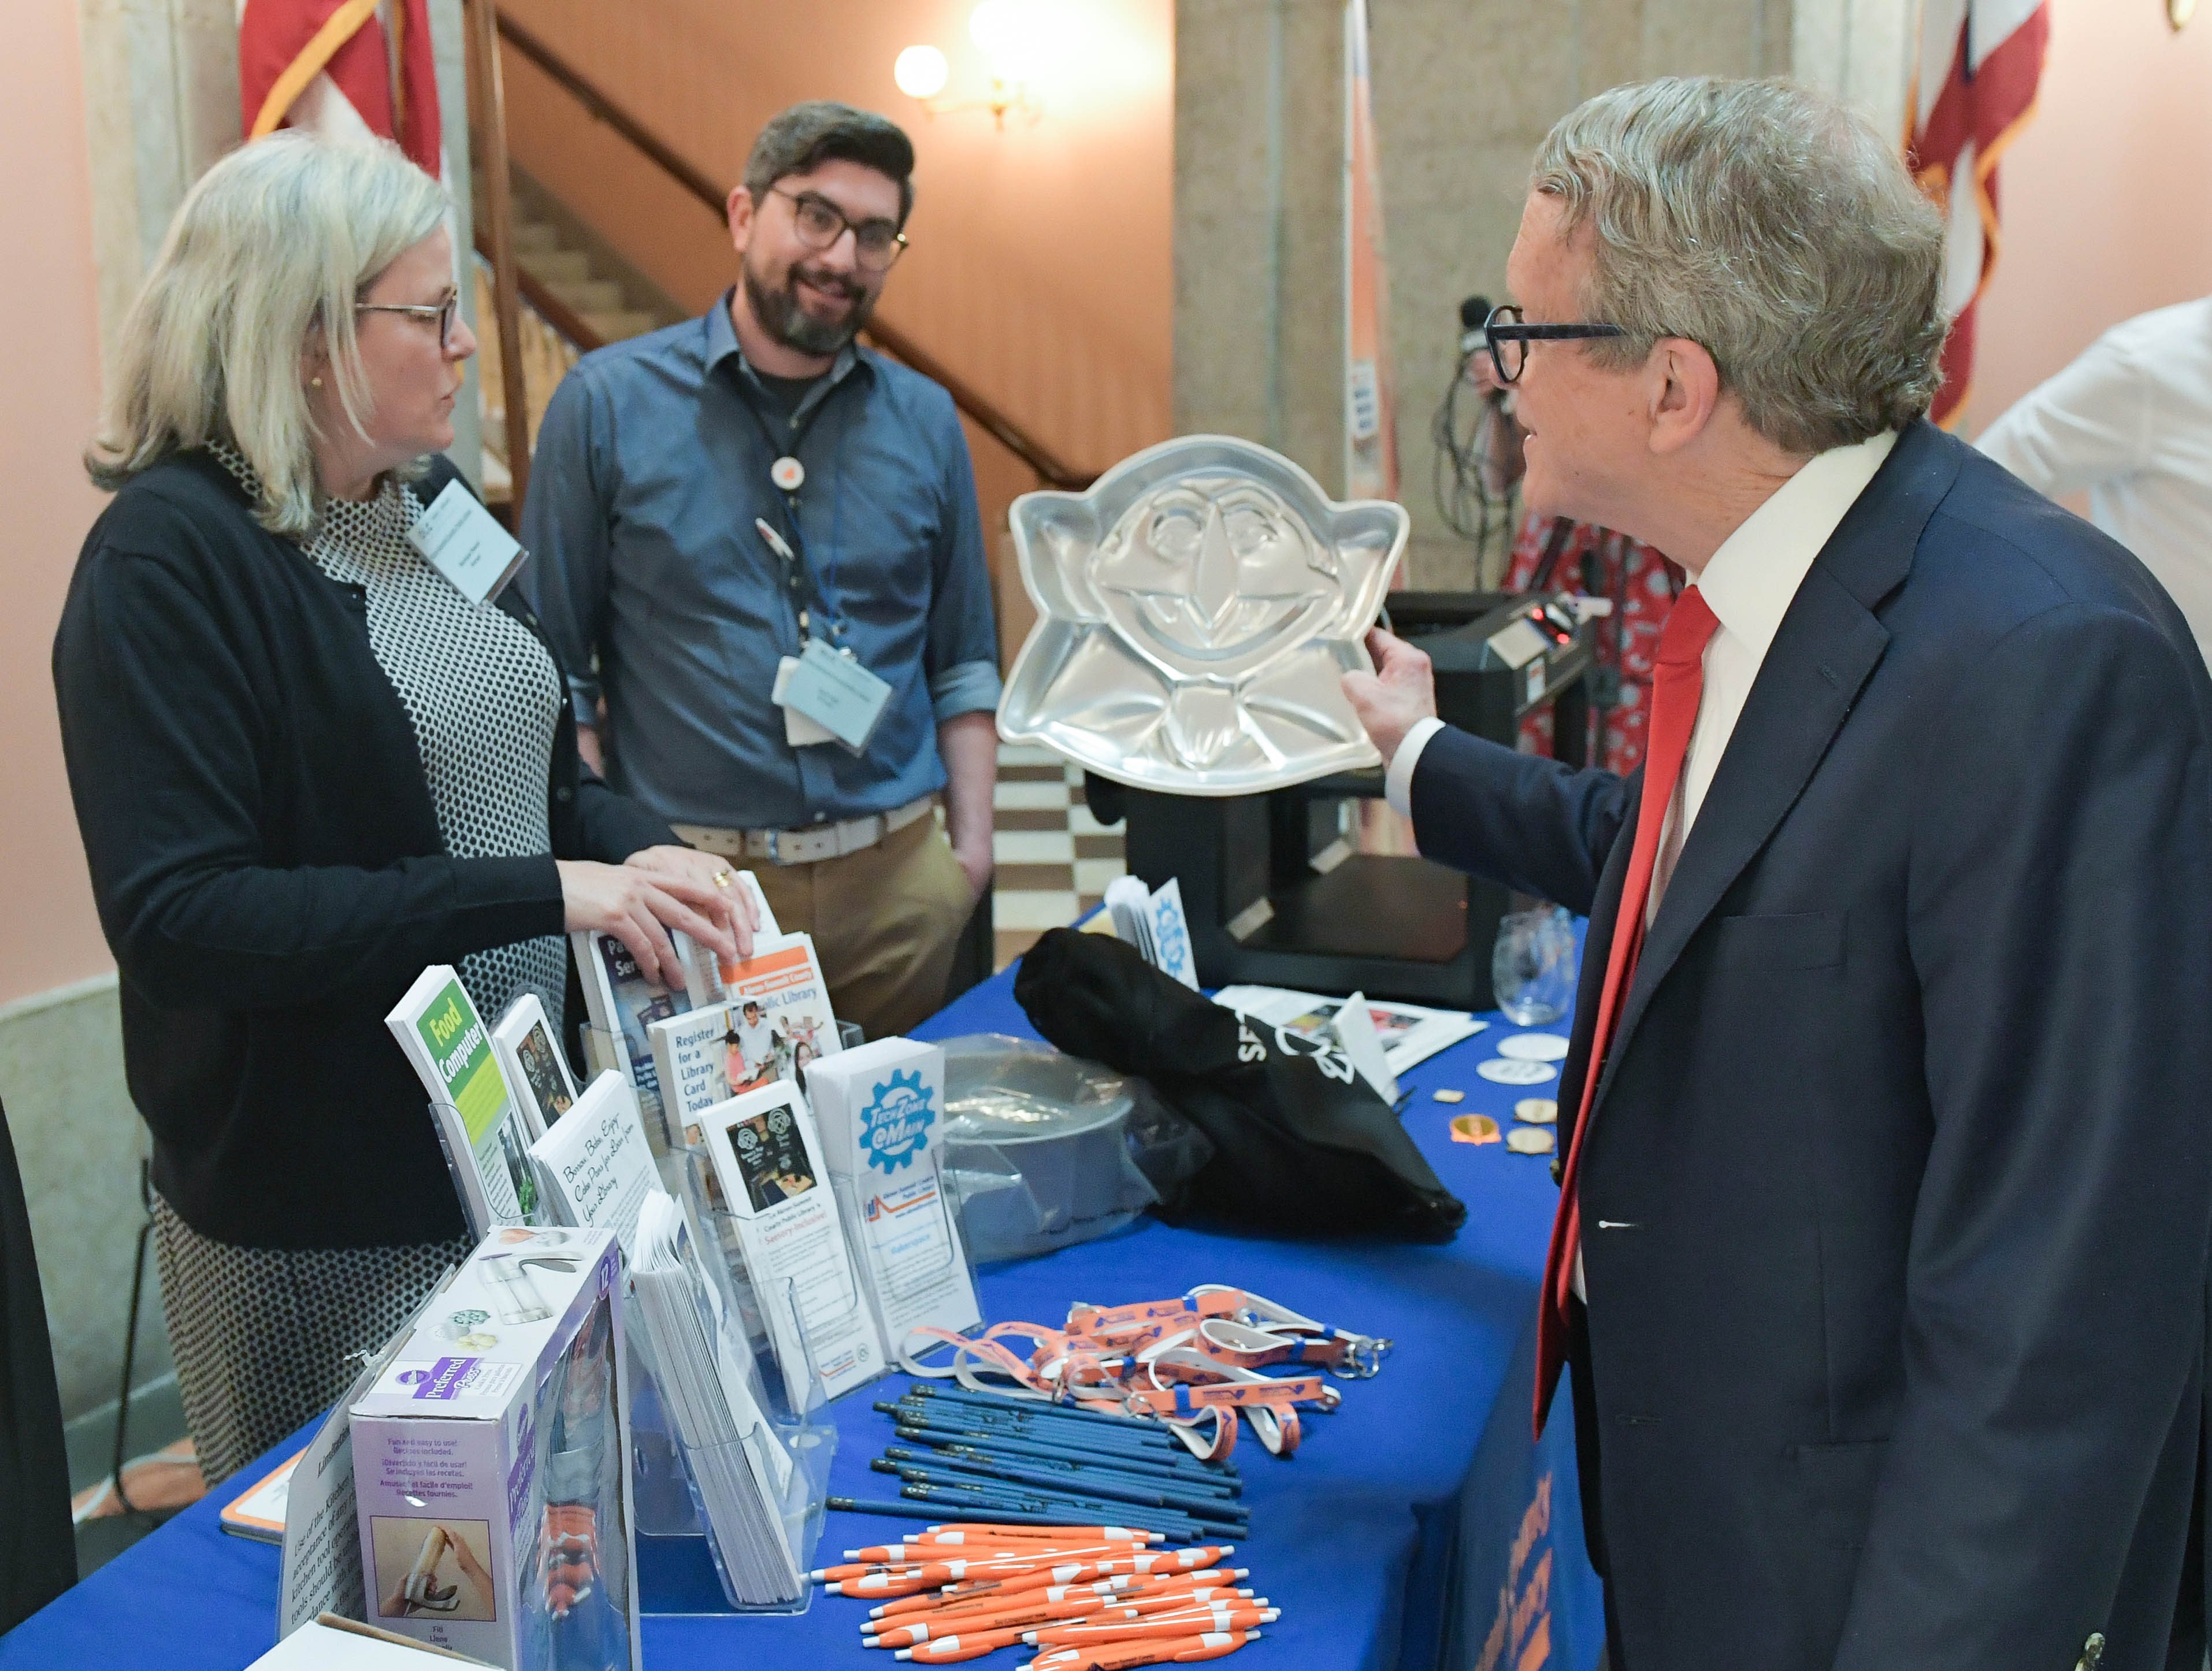 Gov. DeWine and Akron library photo